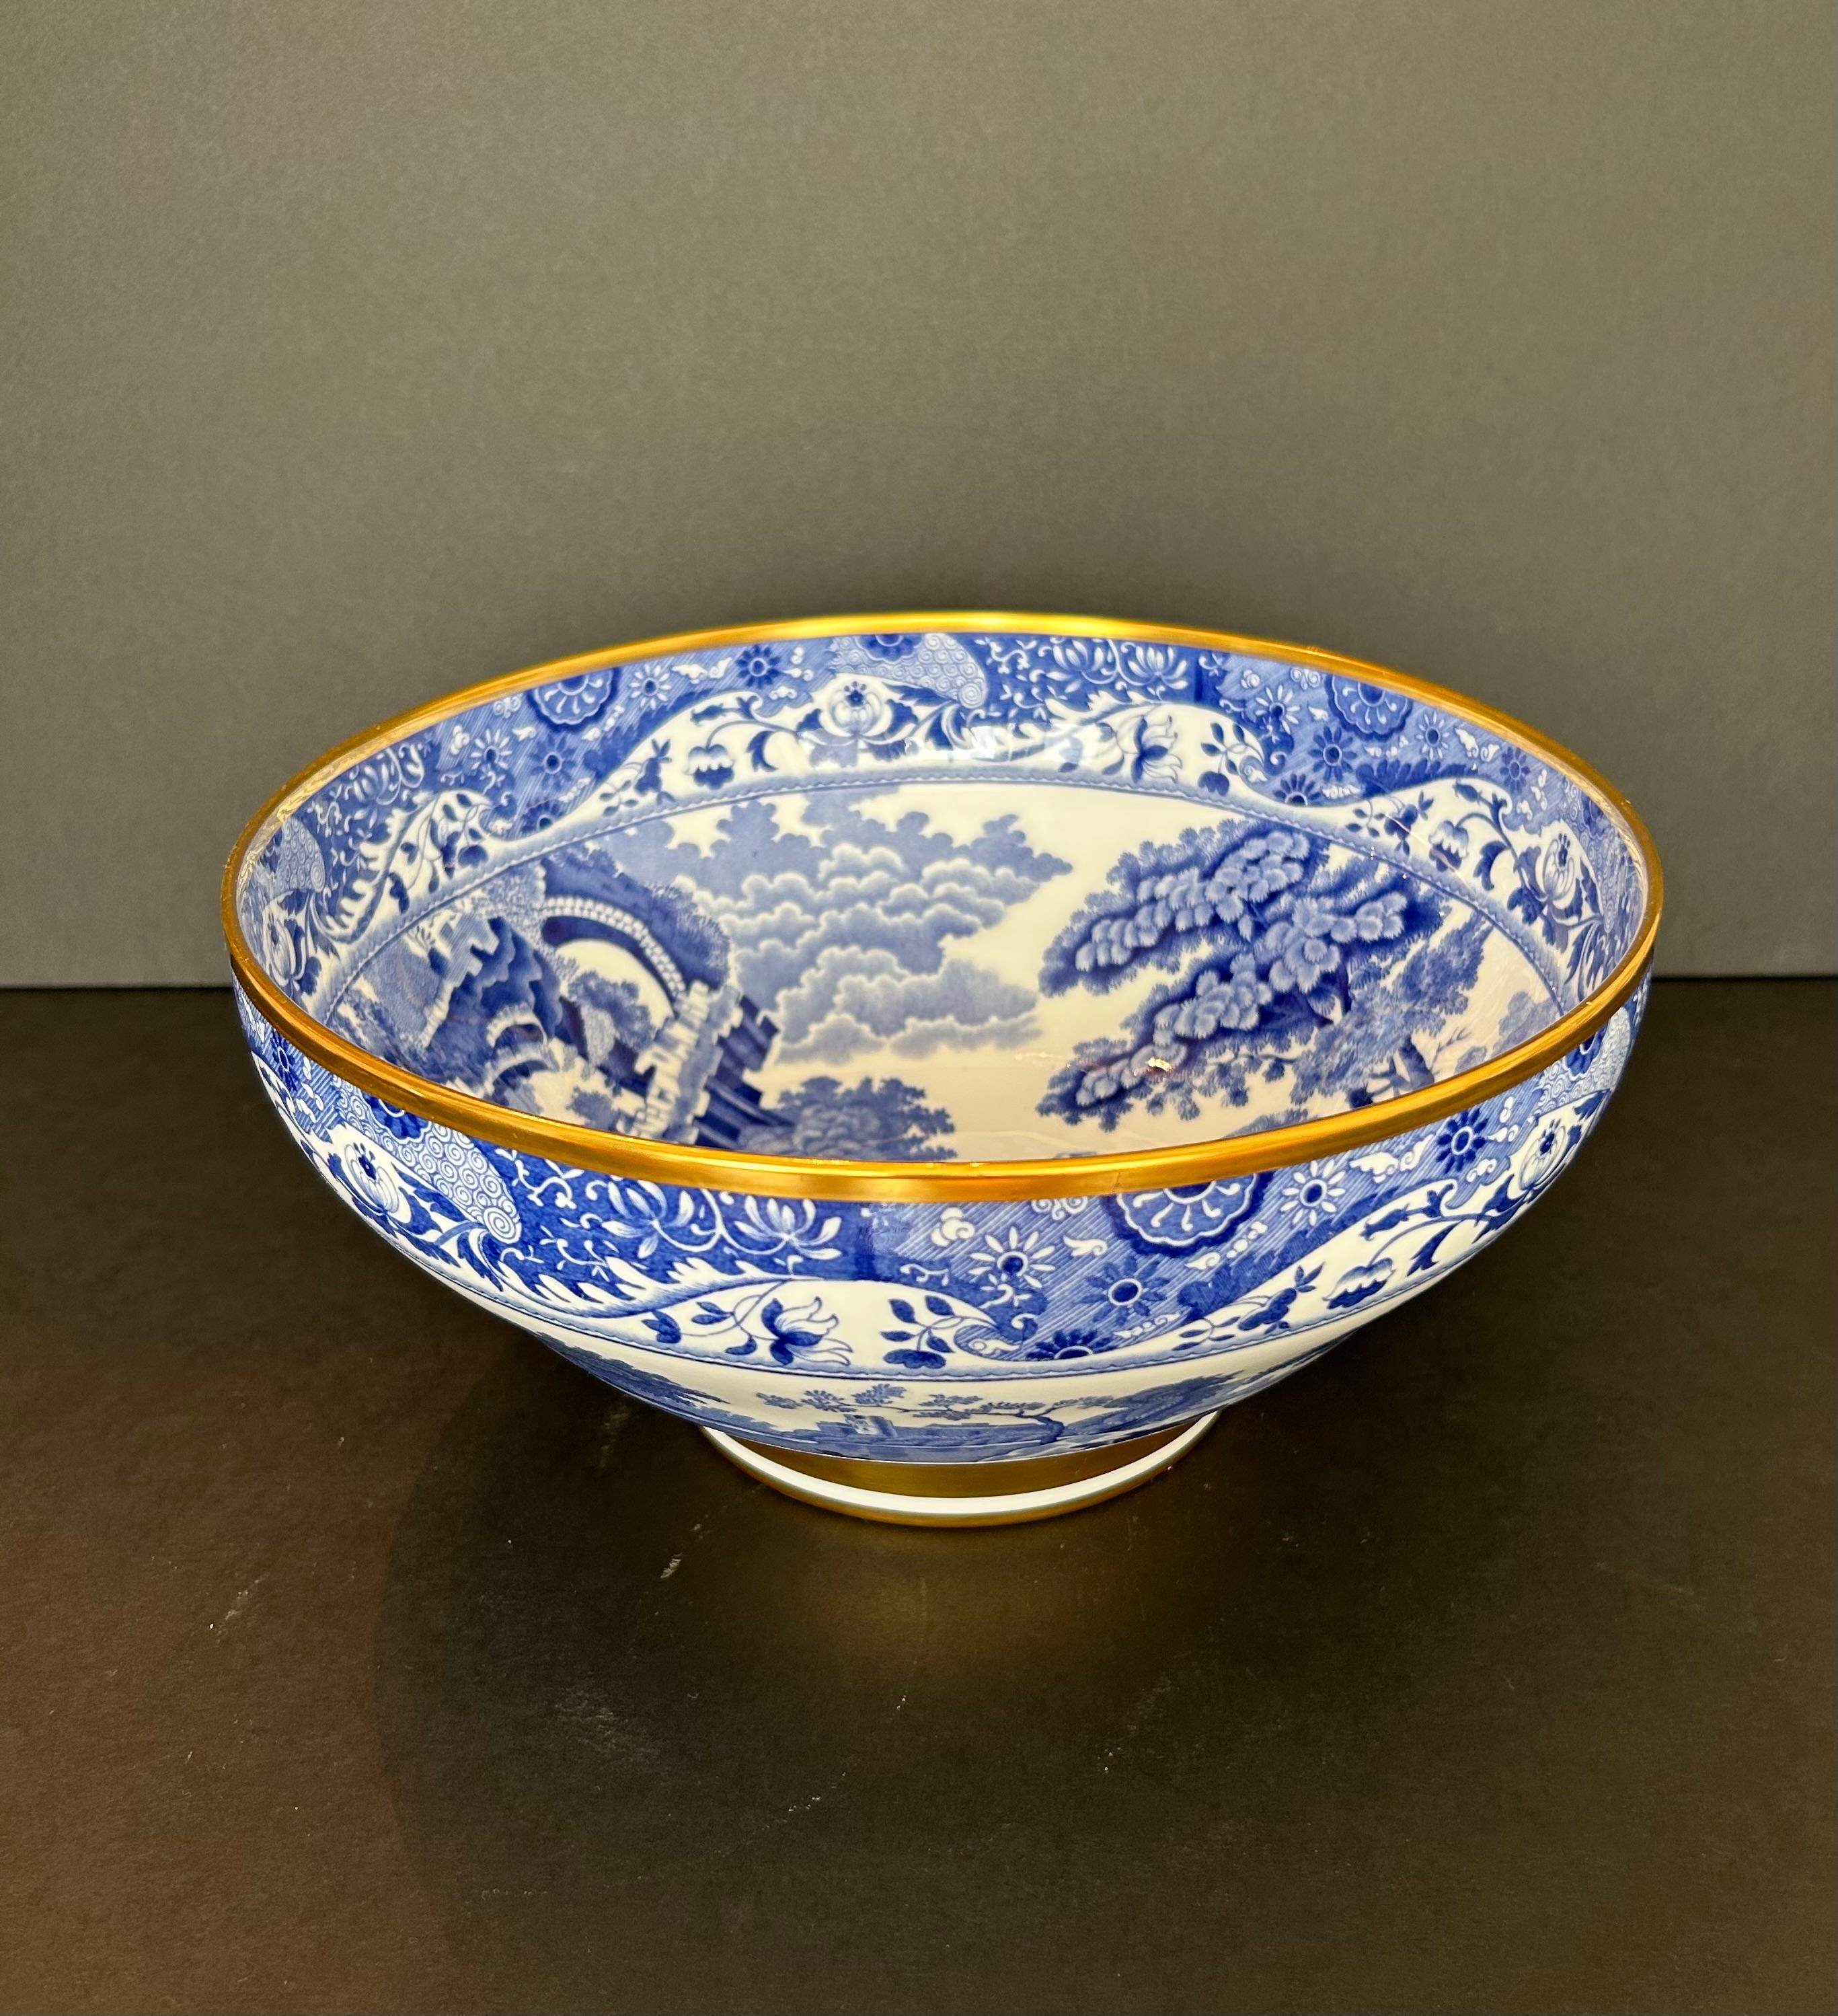 Two spectacular Spode Centrepiece bowls. In the classic Italian pattern, featuring scenes of Italian ruins framed by a finely detailed Chinoiserie border, with gilded accents on the rim and base. Marked to the underside Copeland Spodes Italian